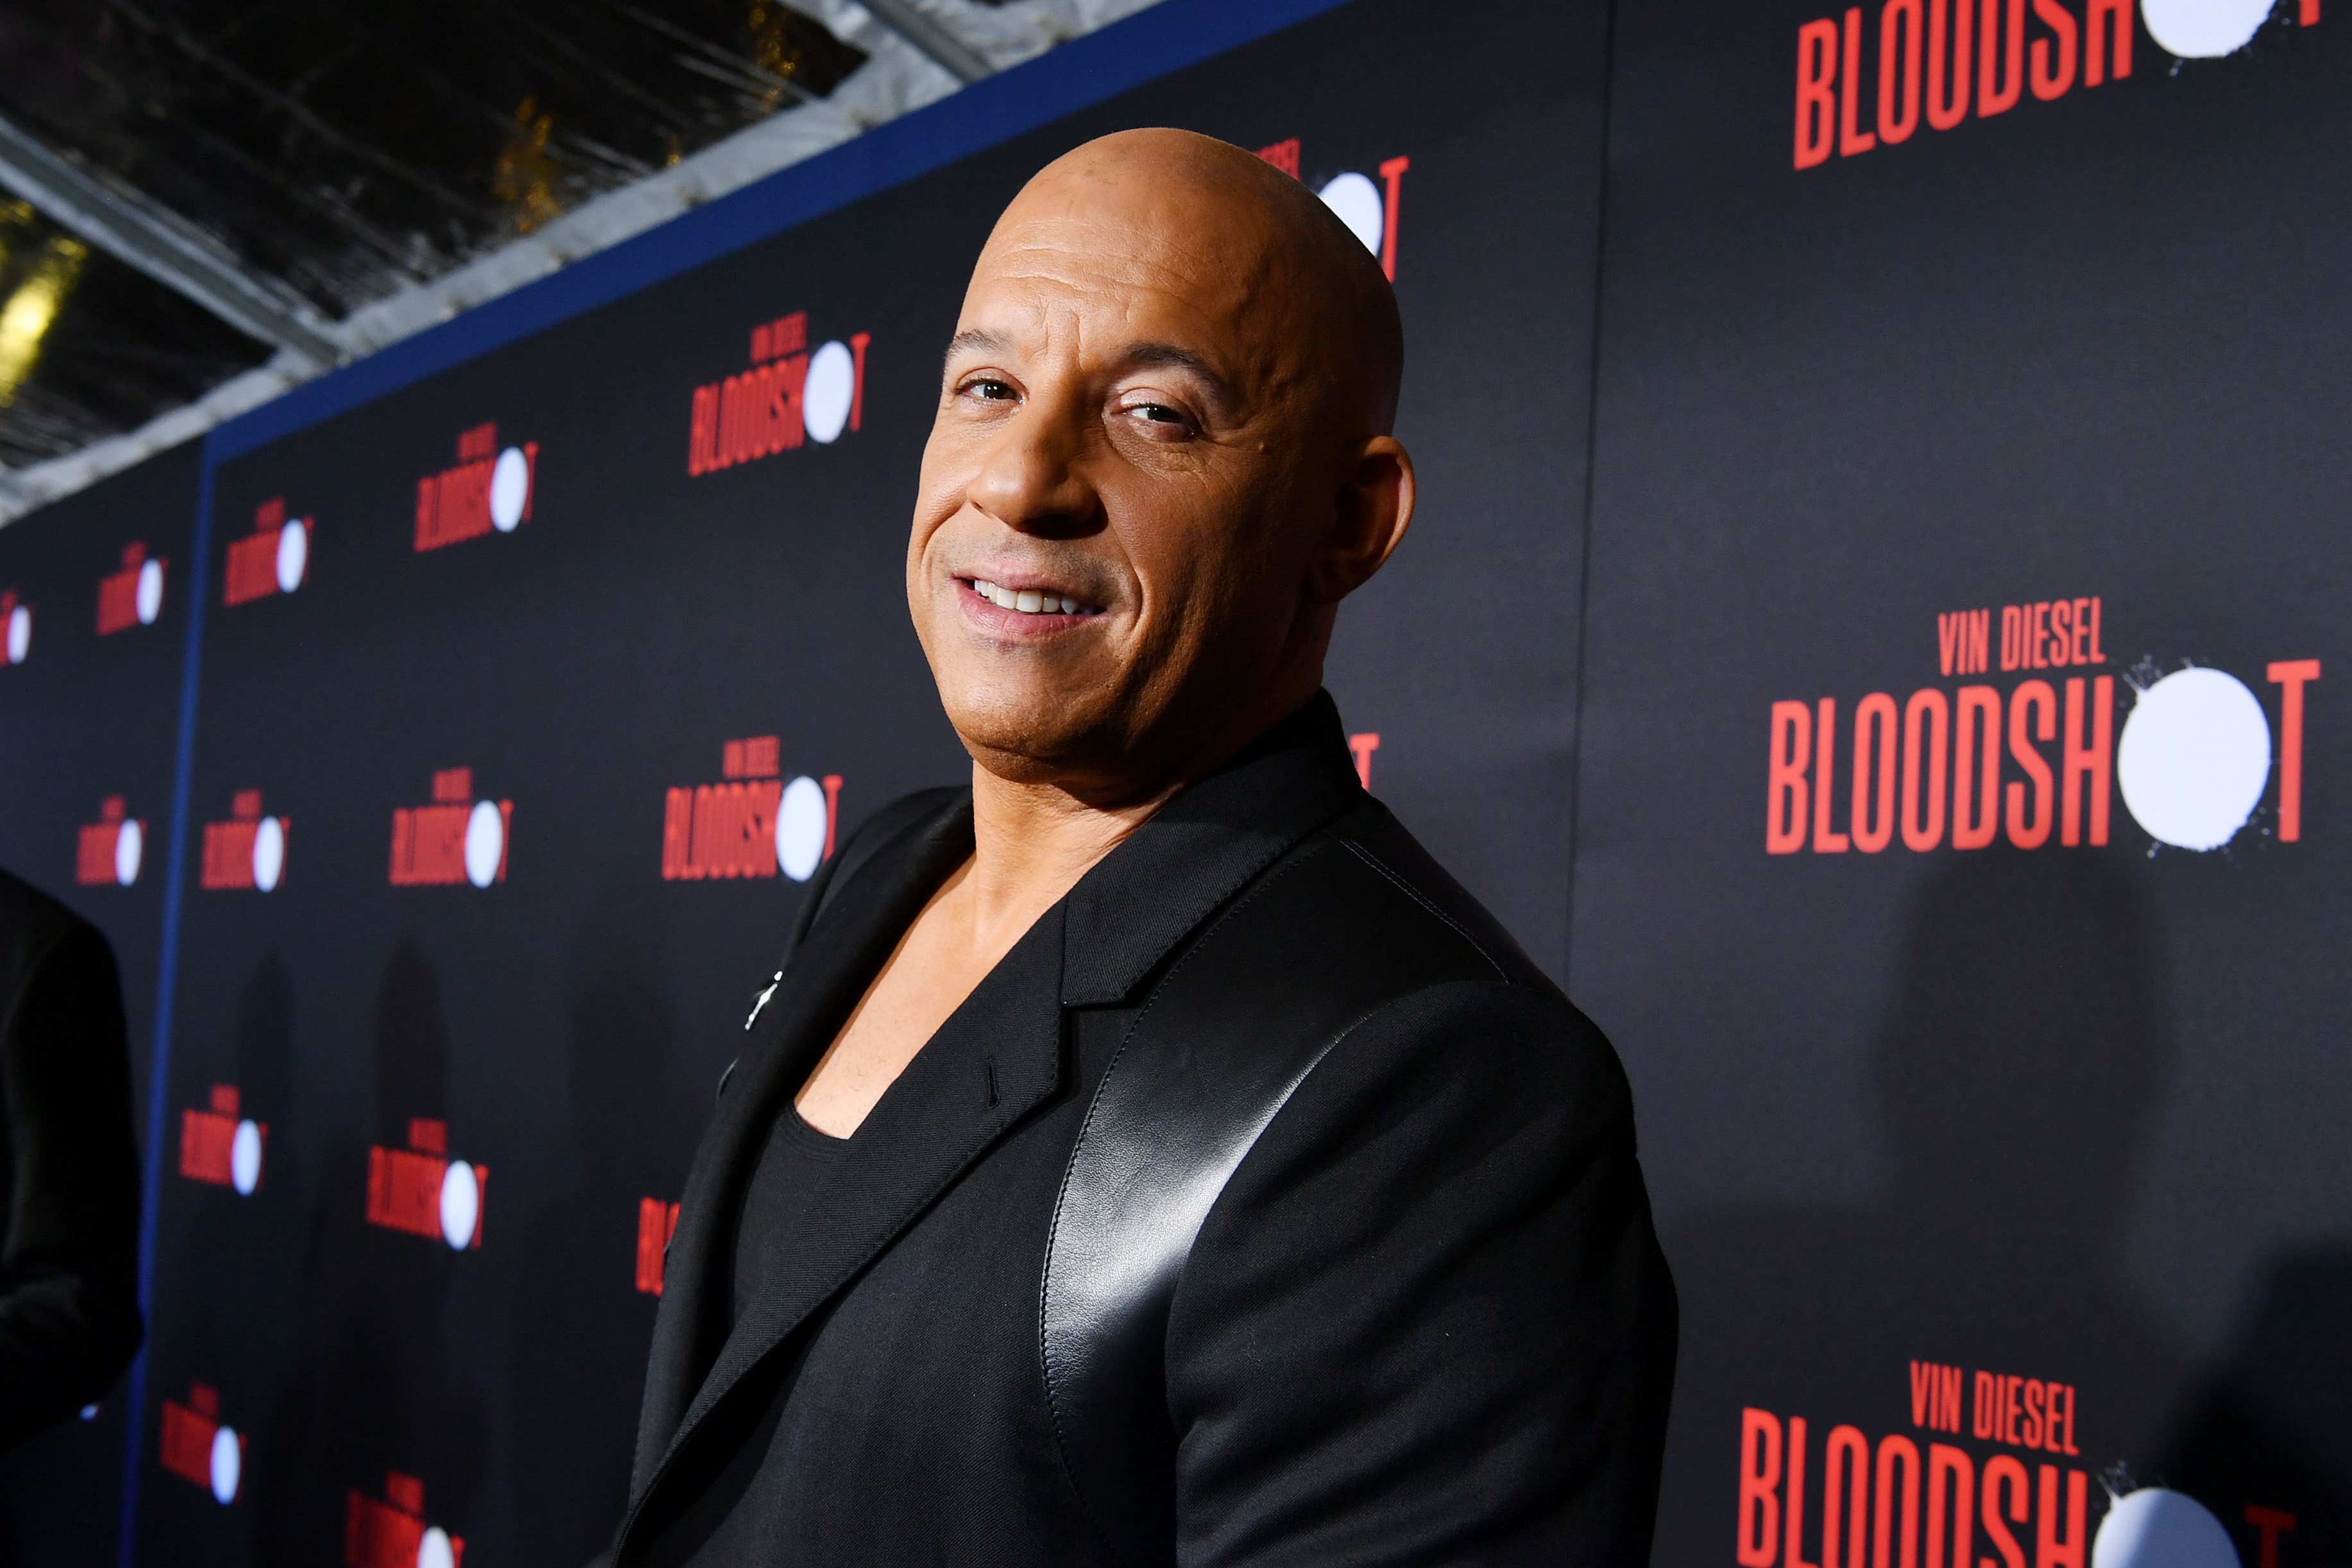 Vin Diesel smiles while wearing a black outfit.